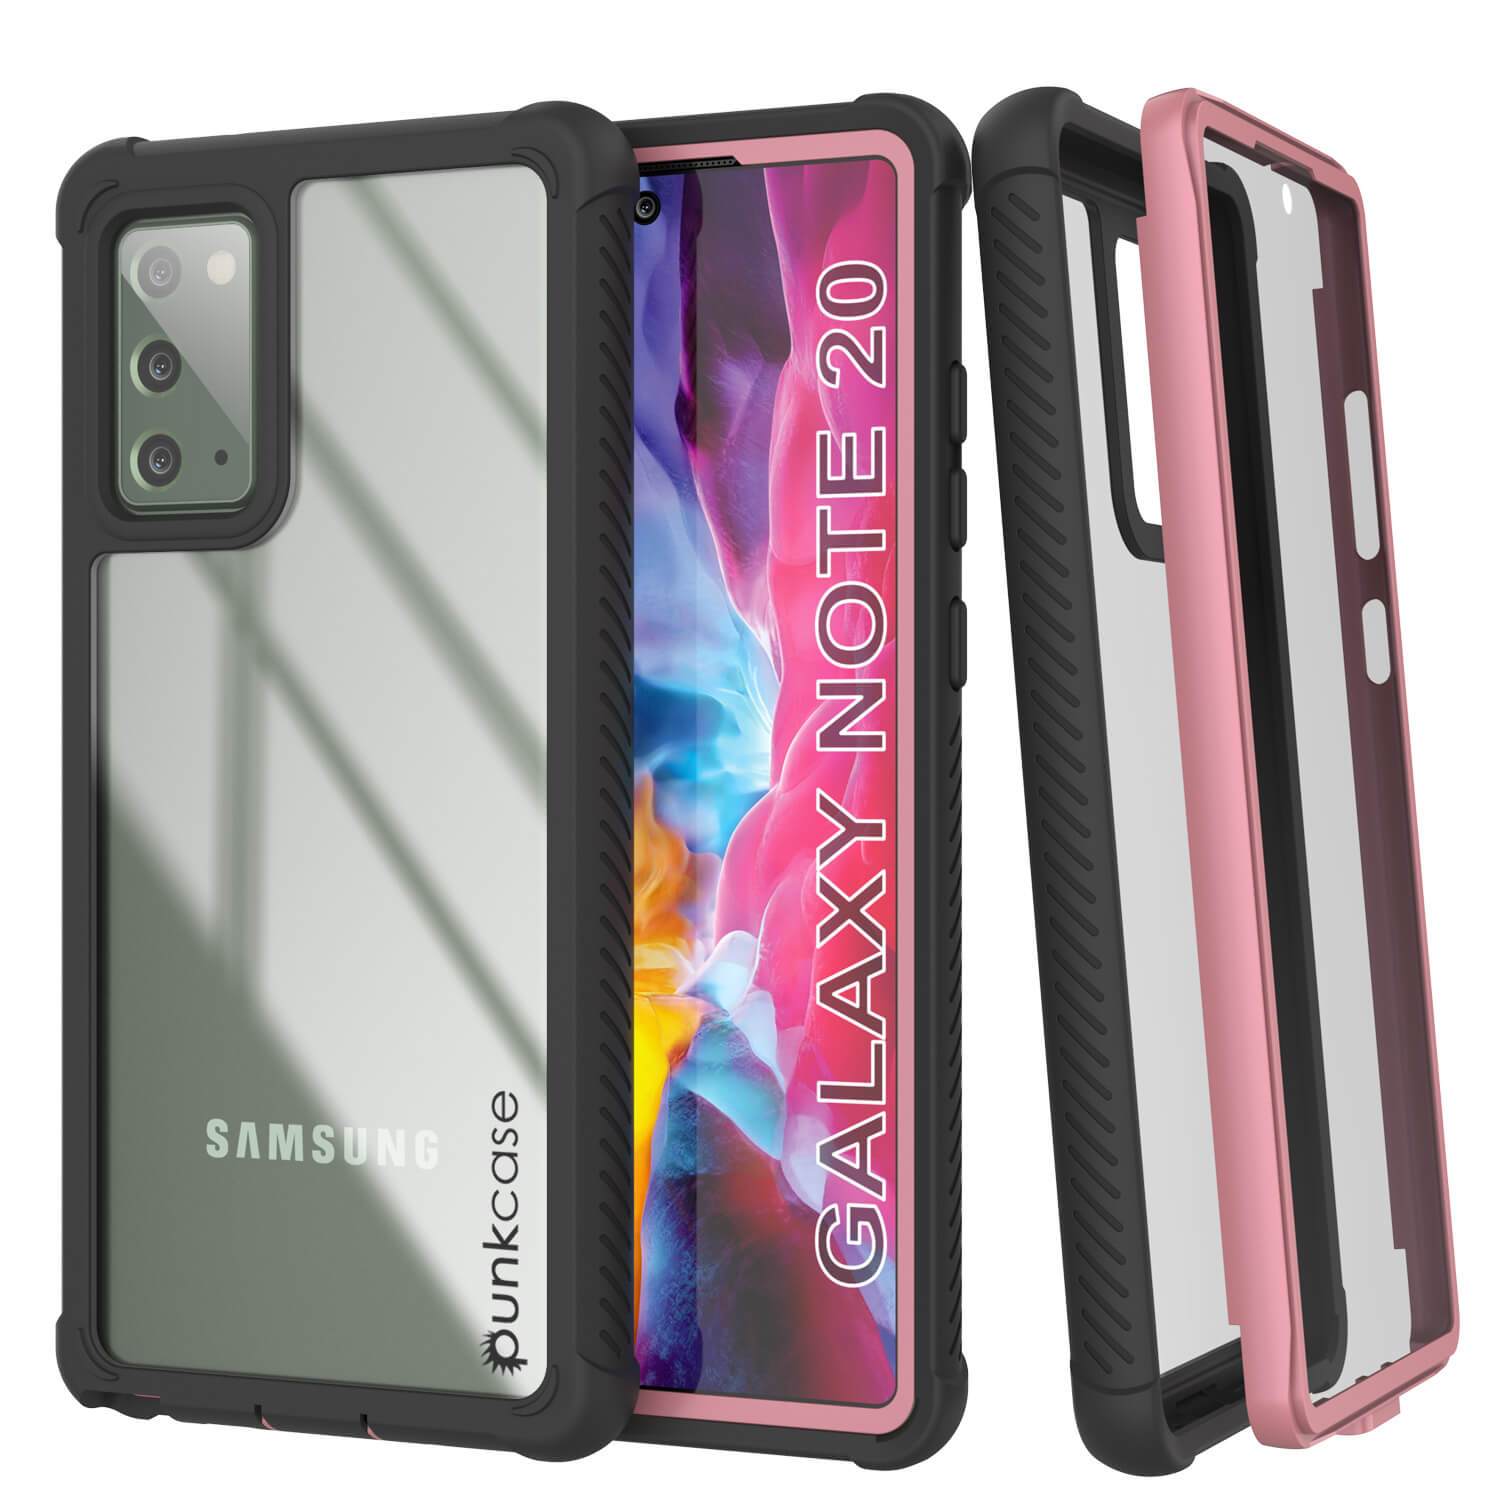 Punkcase Galaxy Note 20 Case, [Spartan Series] Pink Rugged Heavy Duty Cover W/Built in Screen Protector